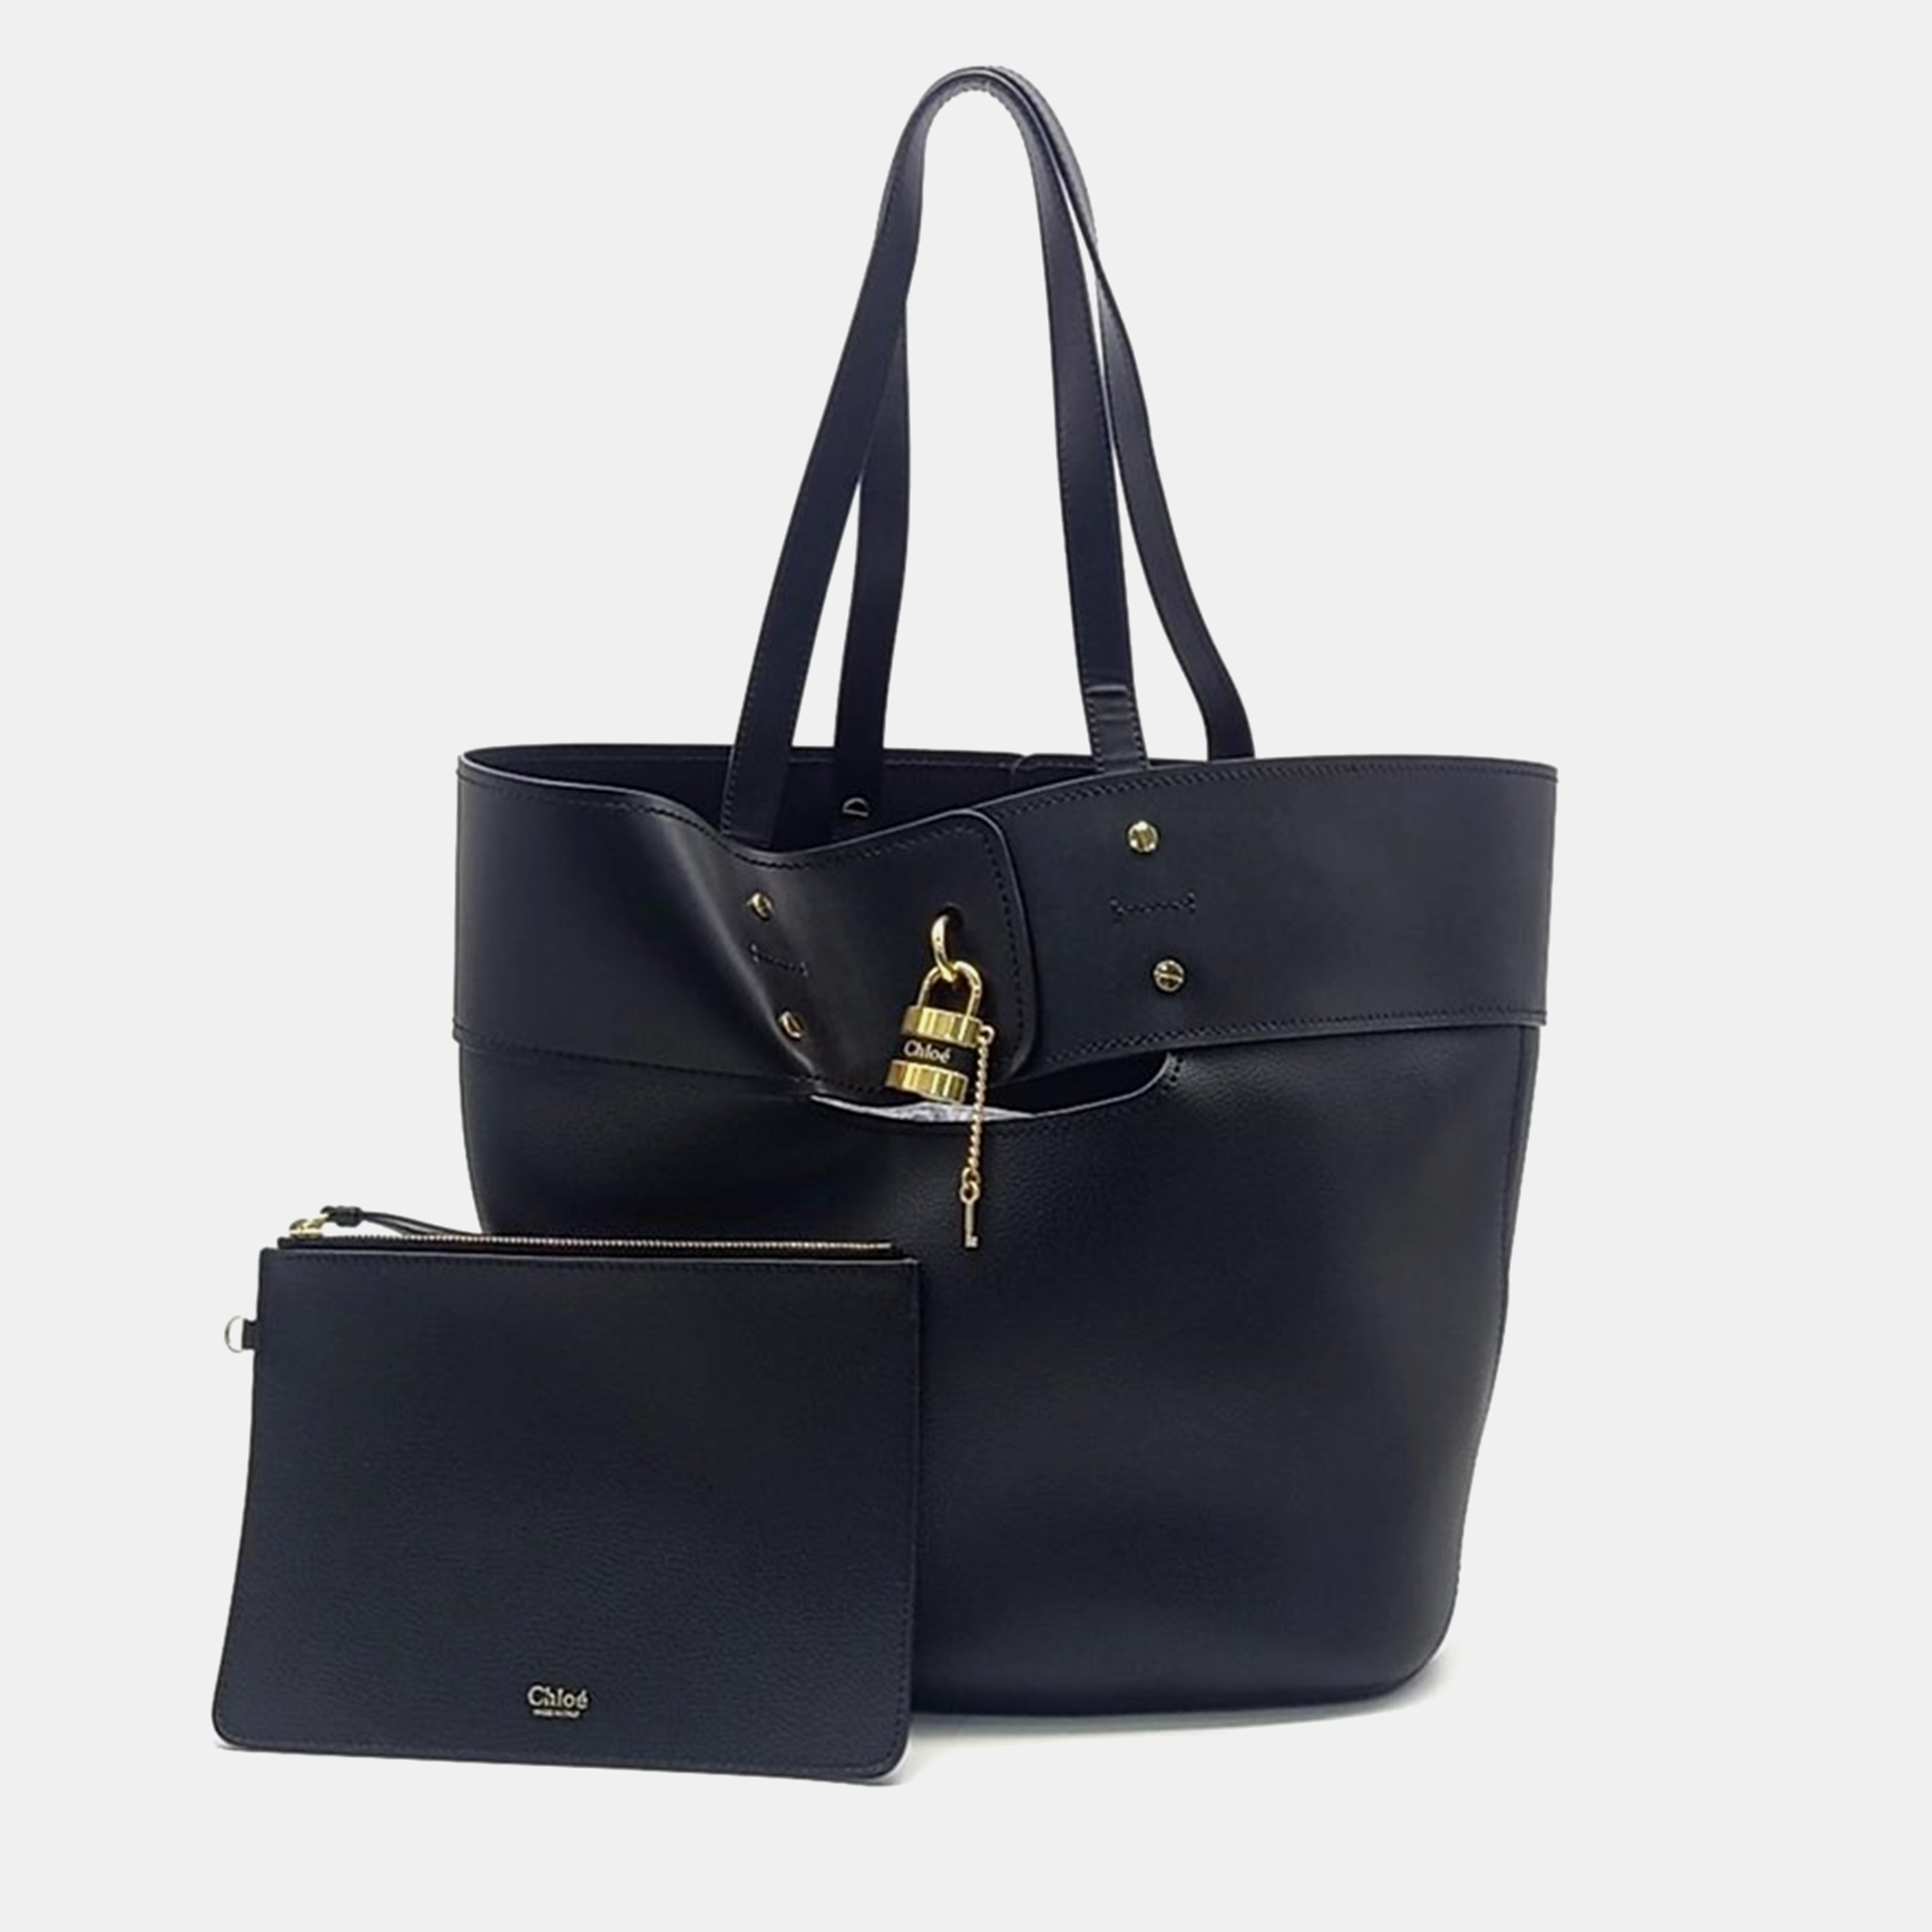 

Chloe Black Leather Aby Tote Bag